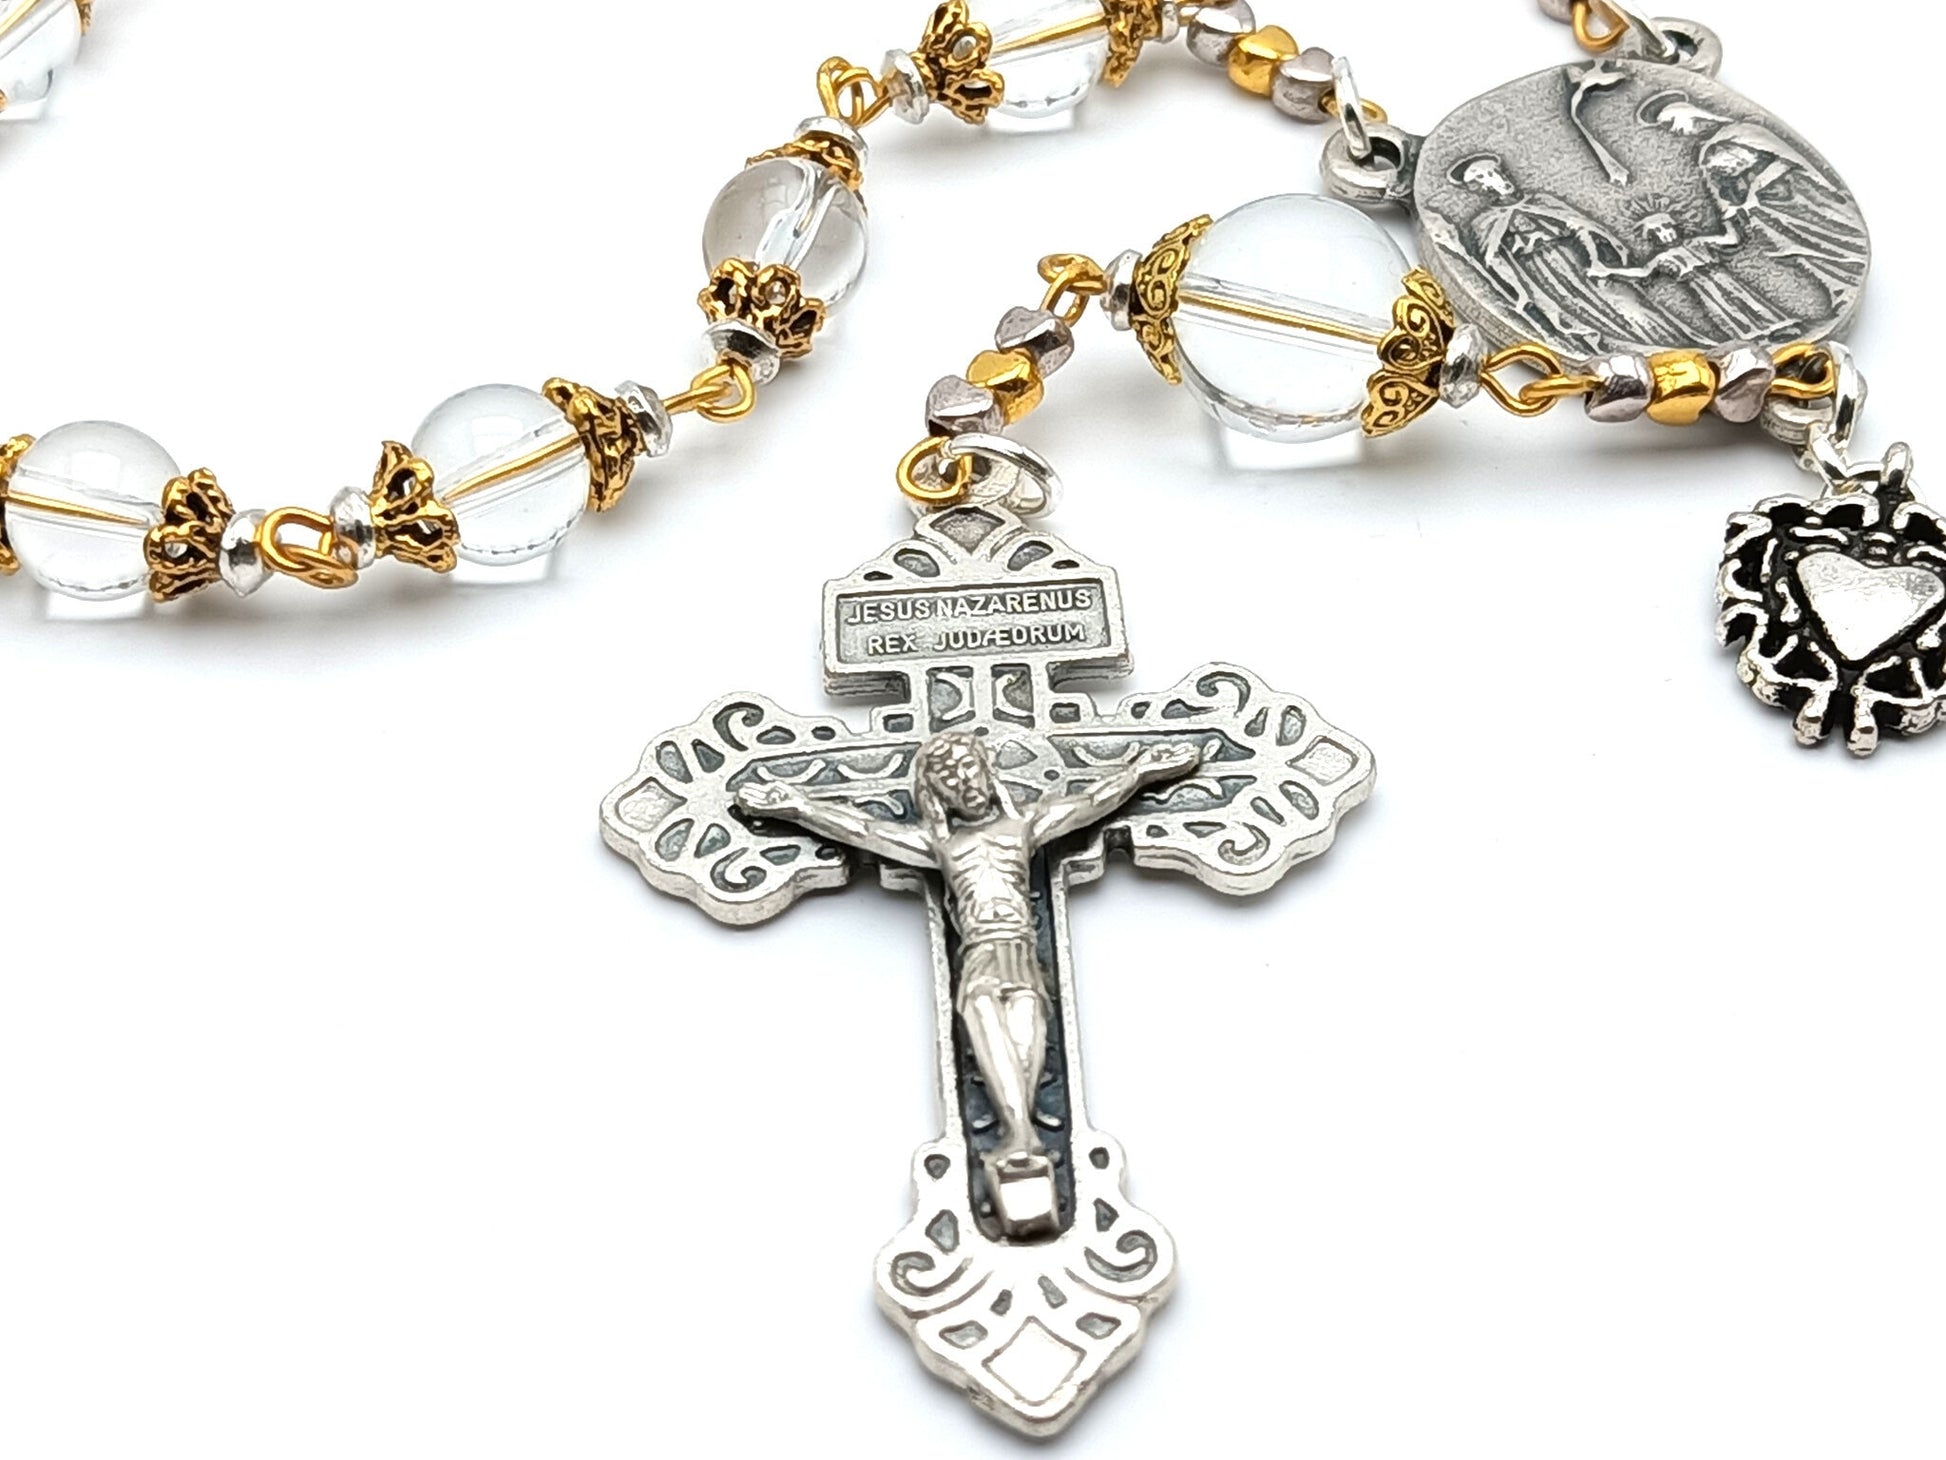 Three Hearts of Jesus, Mary and Joseph unique rosary beads single decade or tenner rosary with clear glass beads, golden bead caps, silver pardon crucifix and centre medal.